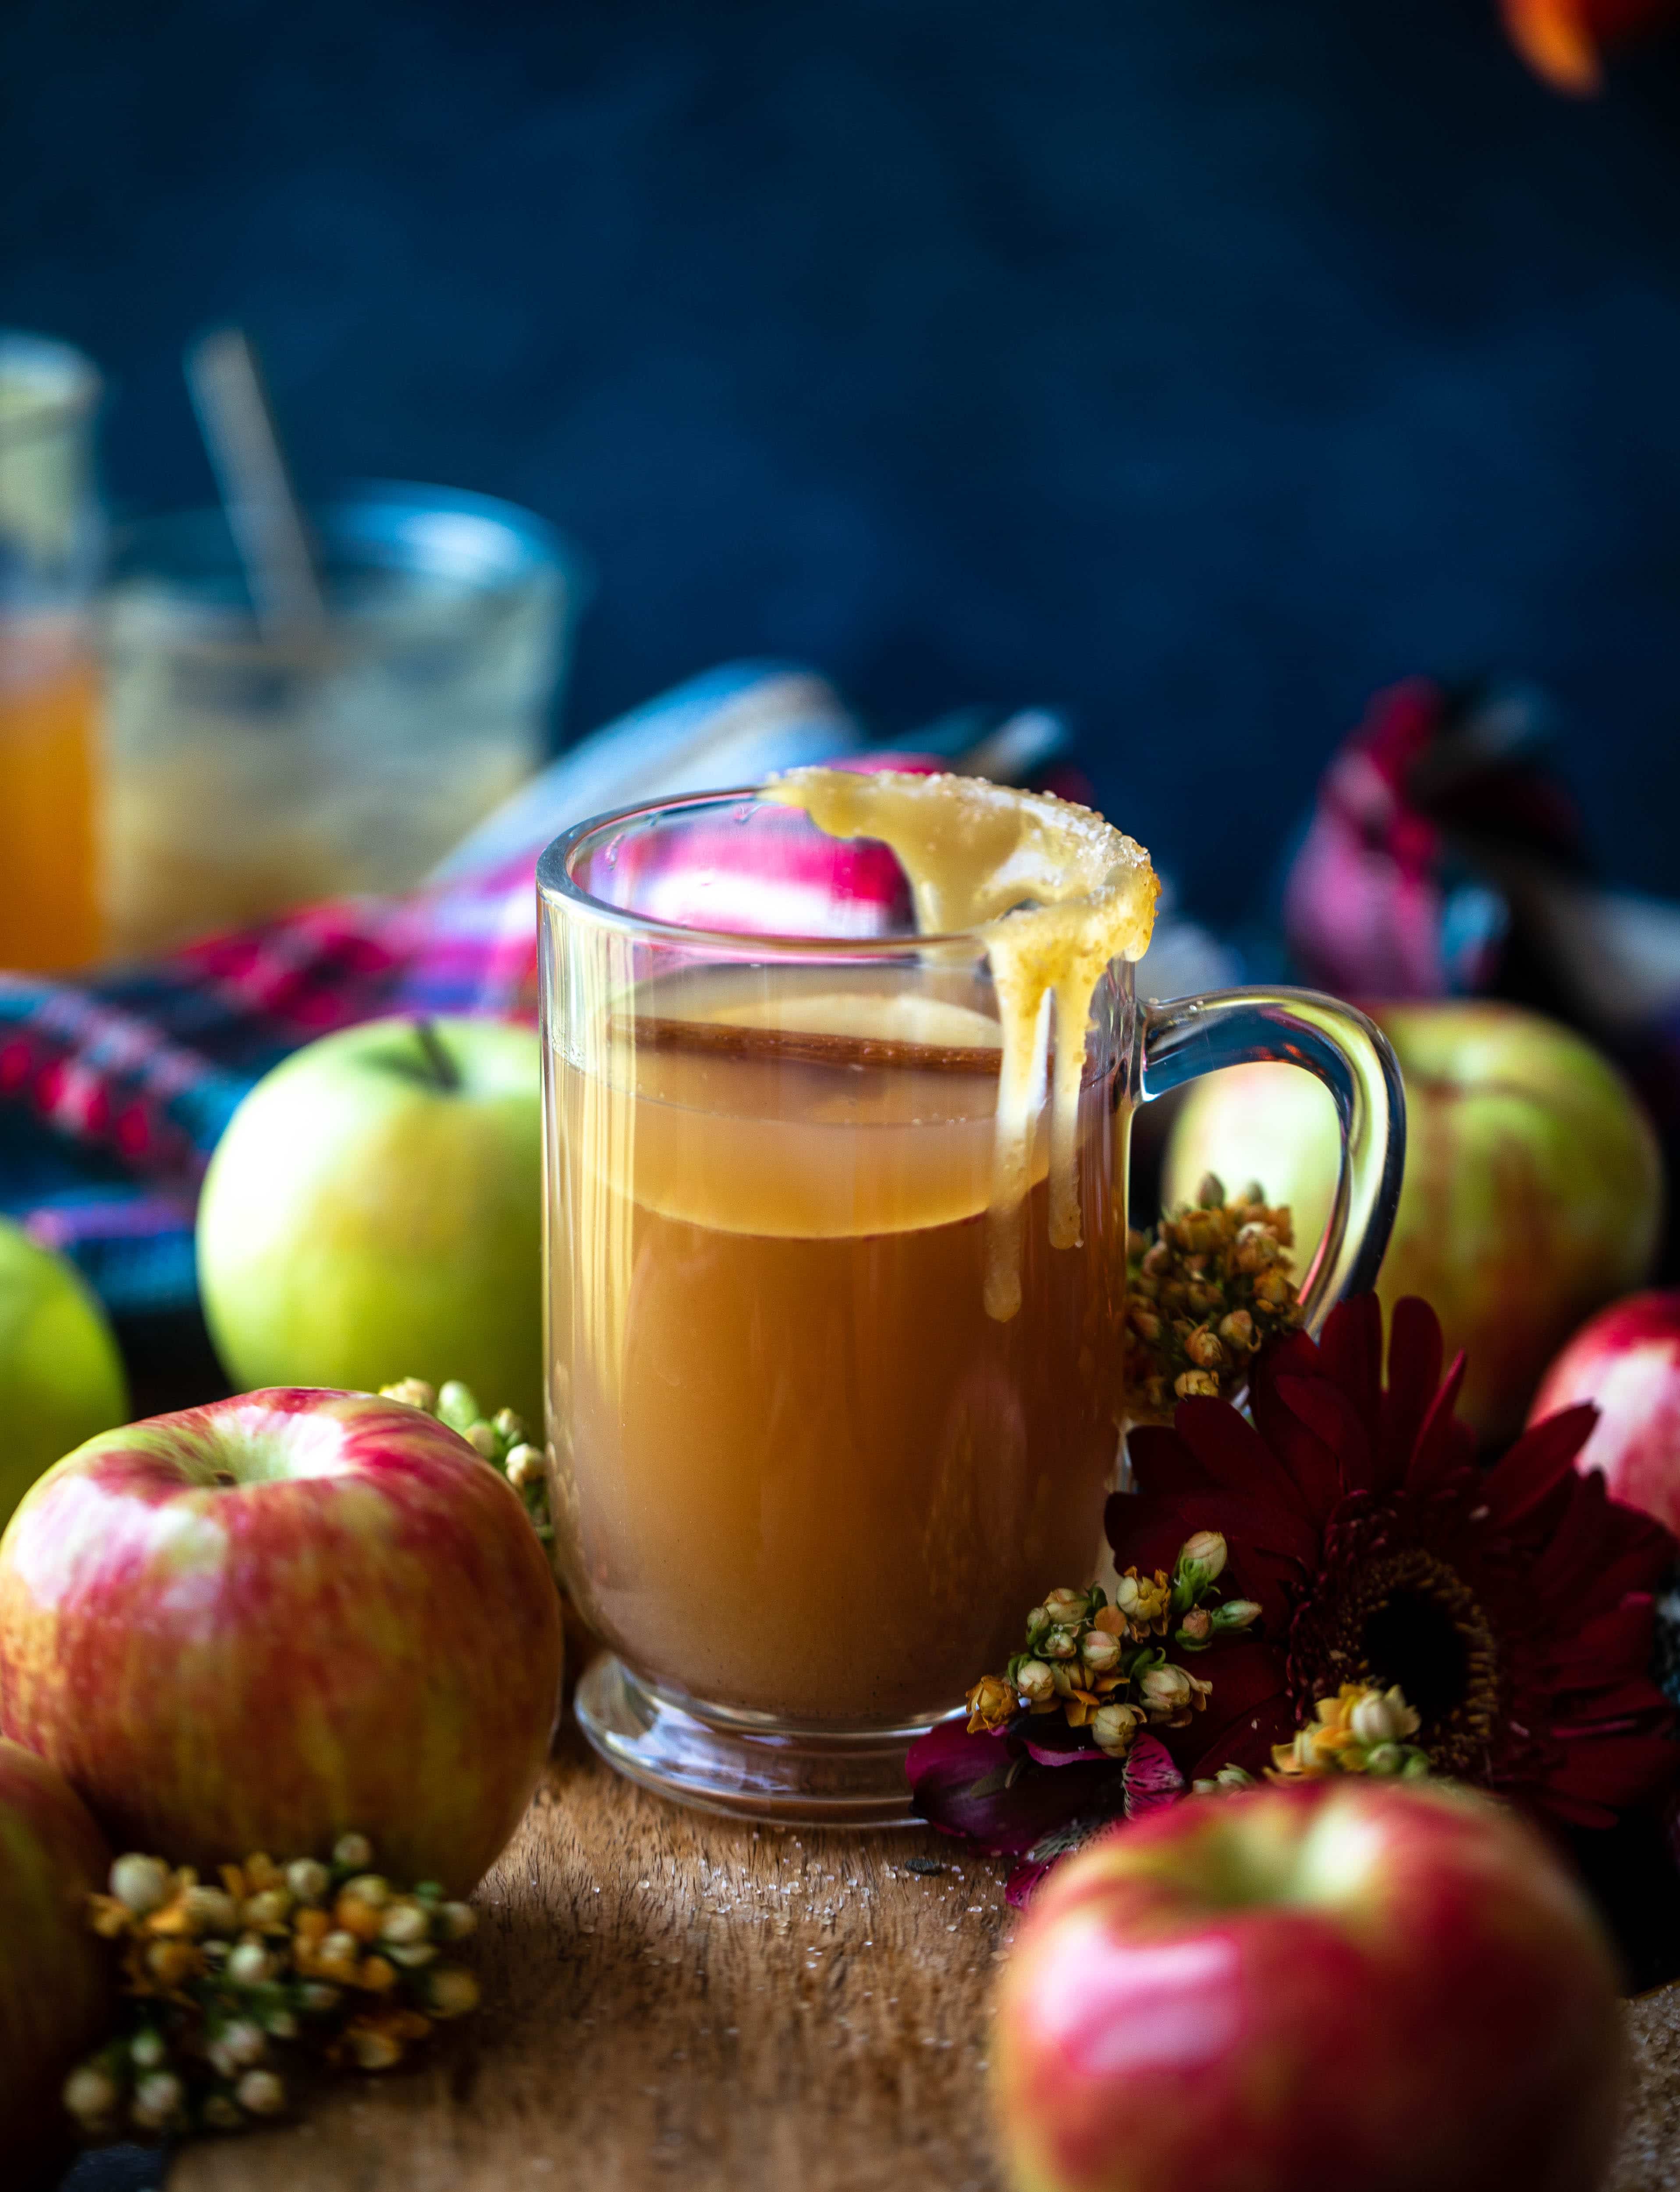 This homemade apple cider is made with honeycrisp apples, spices and vanilla. It's incredible served hot or cold, especially with a pour of bourbon!